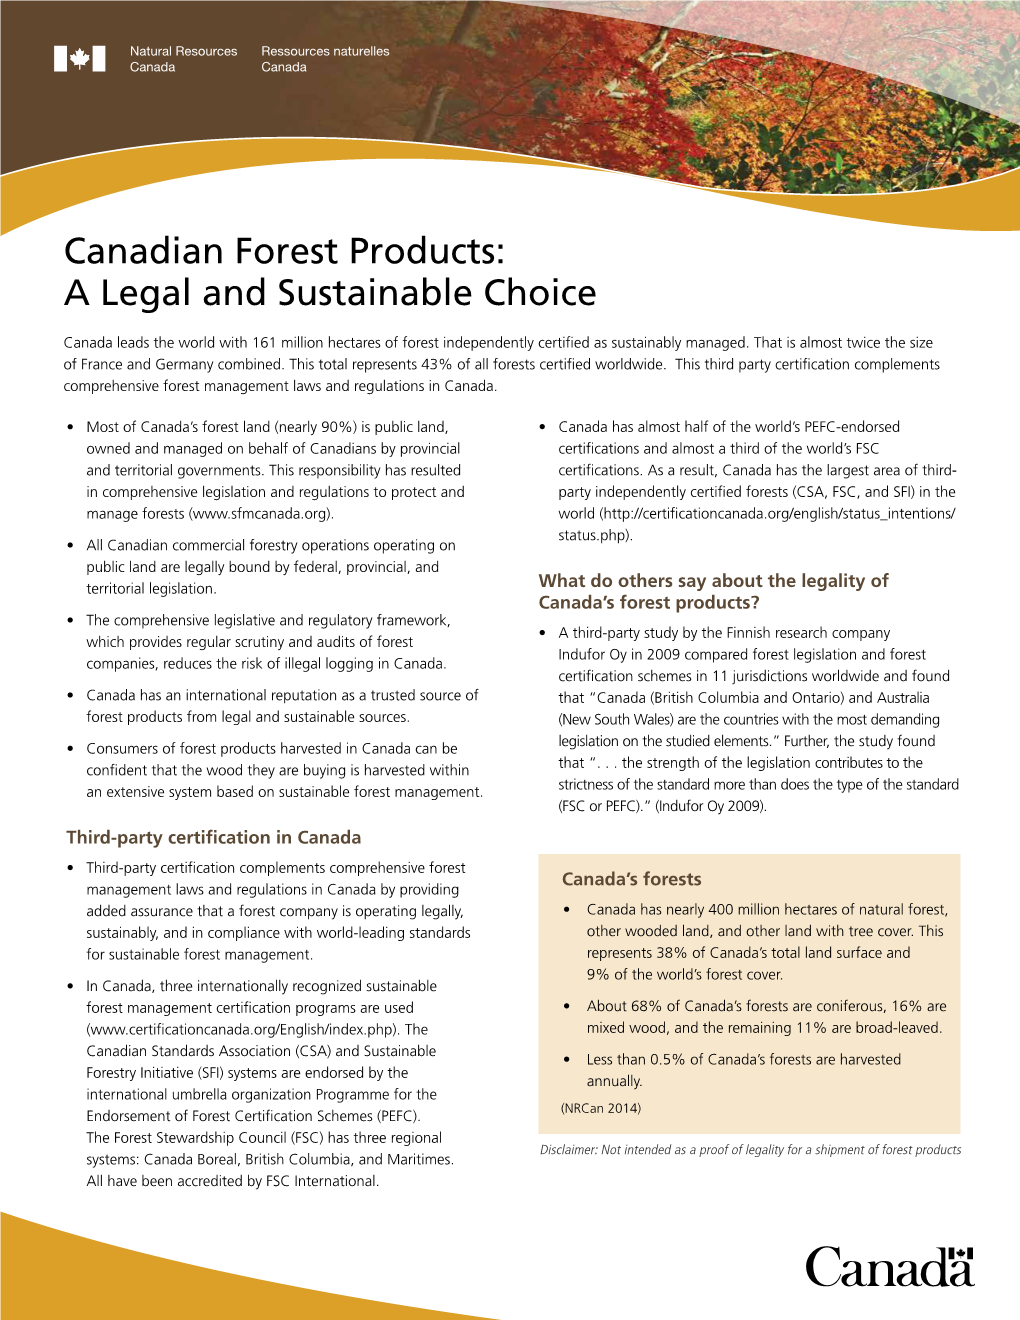 Canadian Forest Products: a Legal and Sustainable Choice